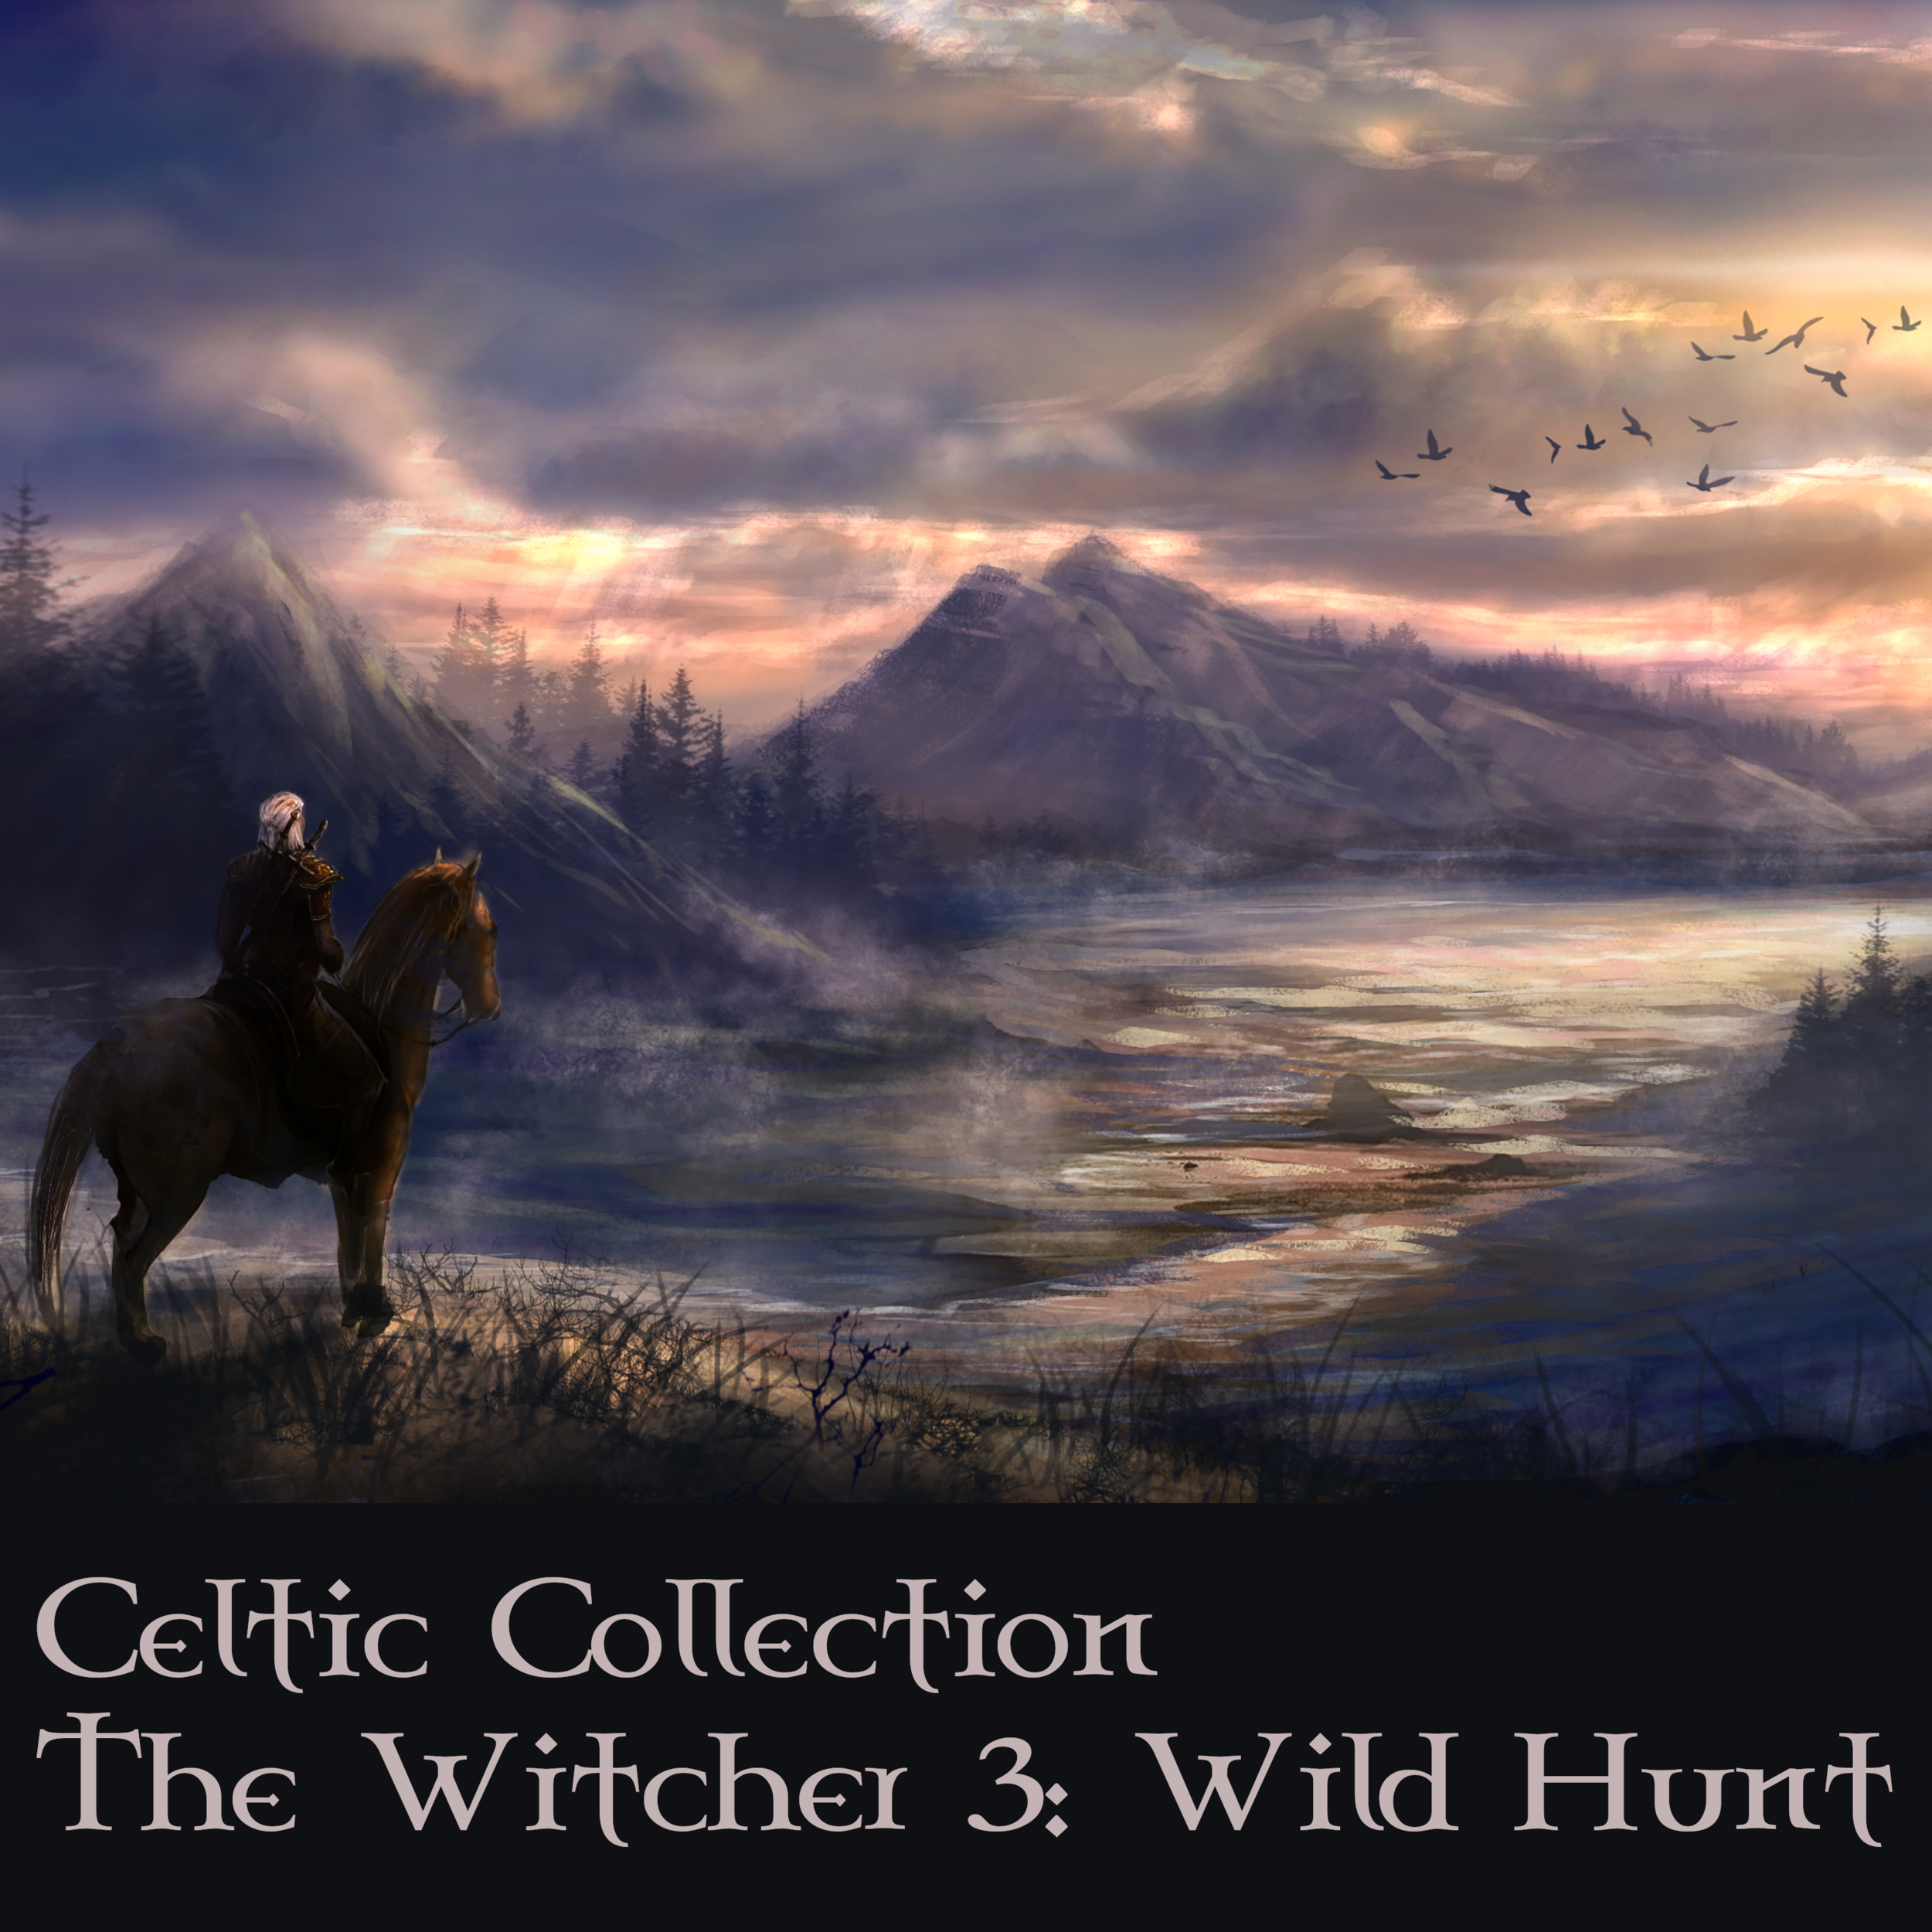 Celtic Collection: The Witcher 3 Wild Hunt